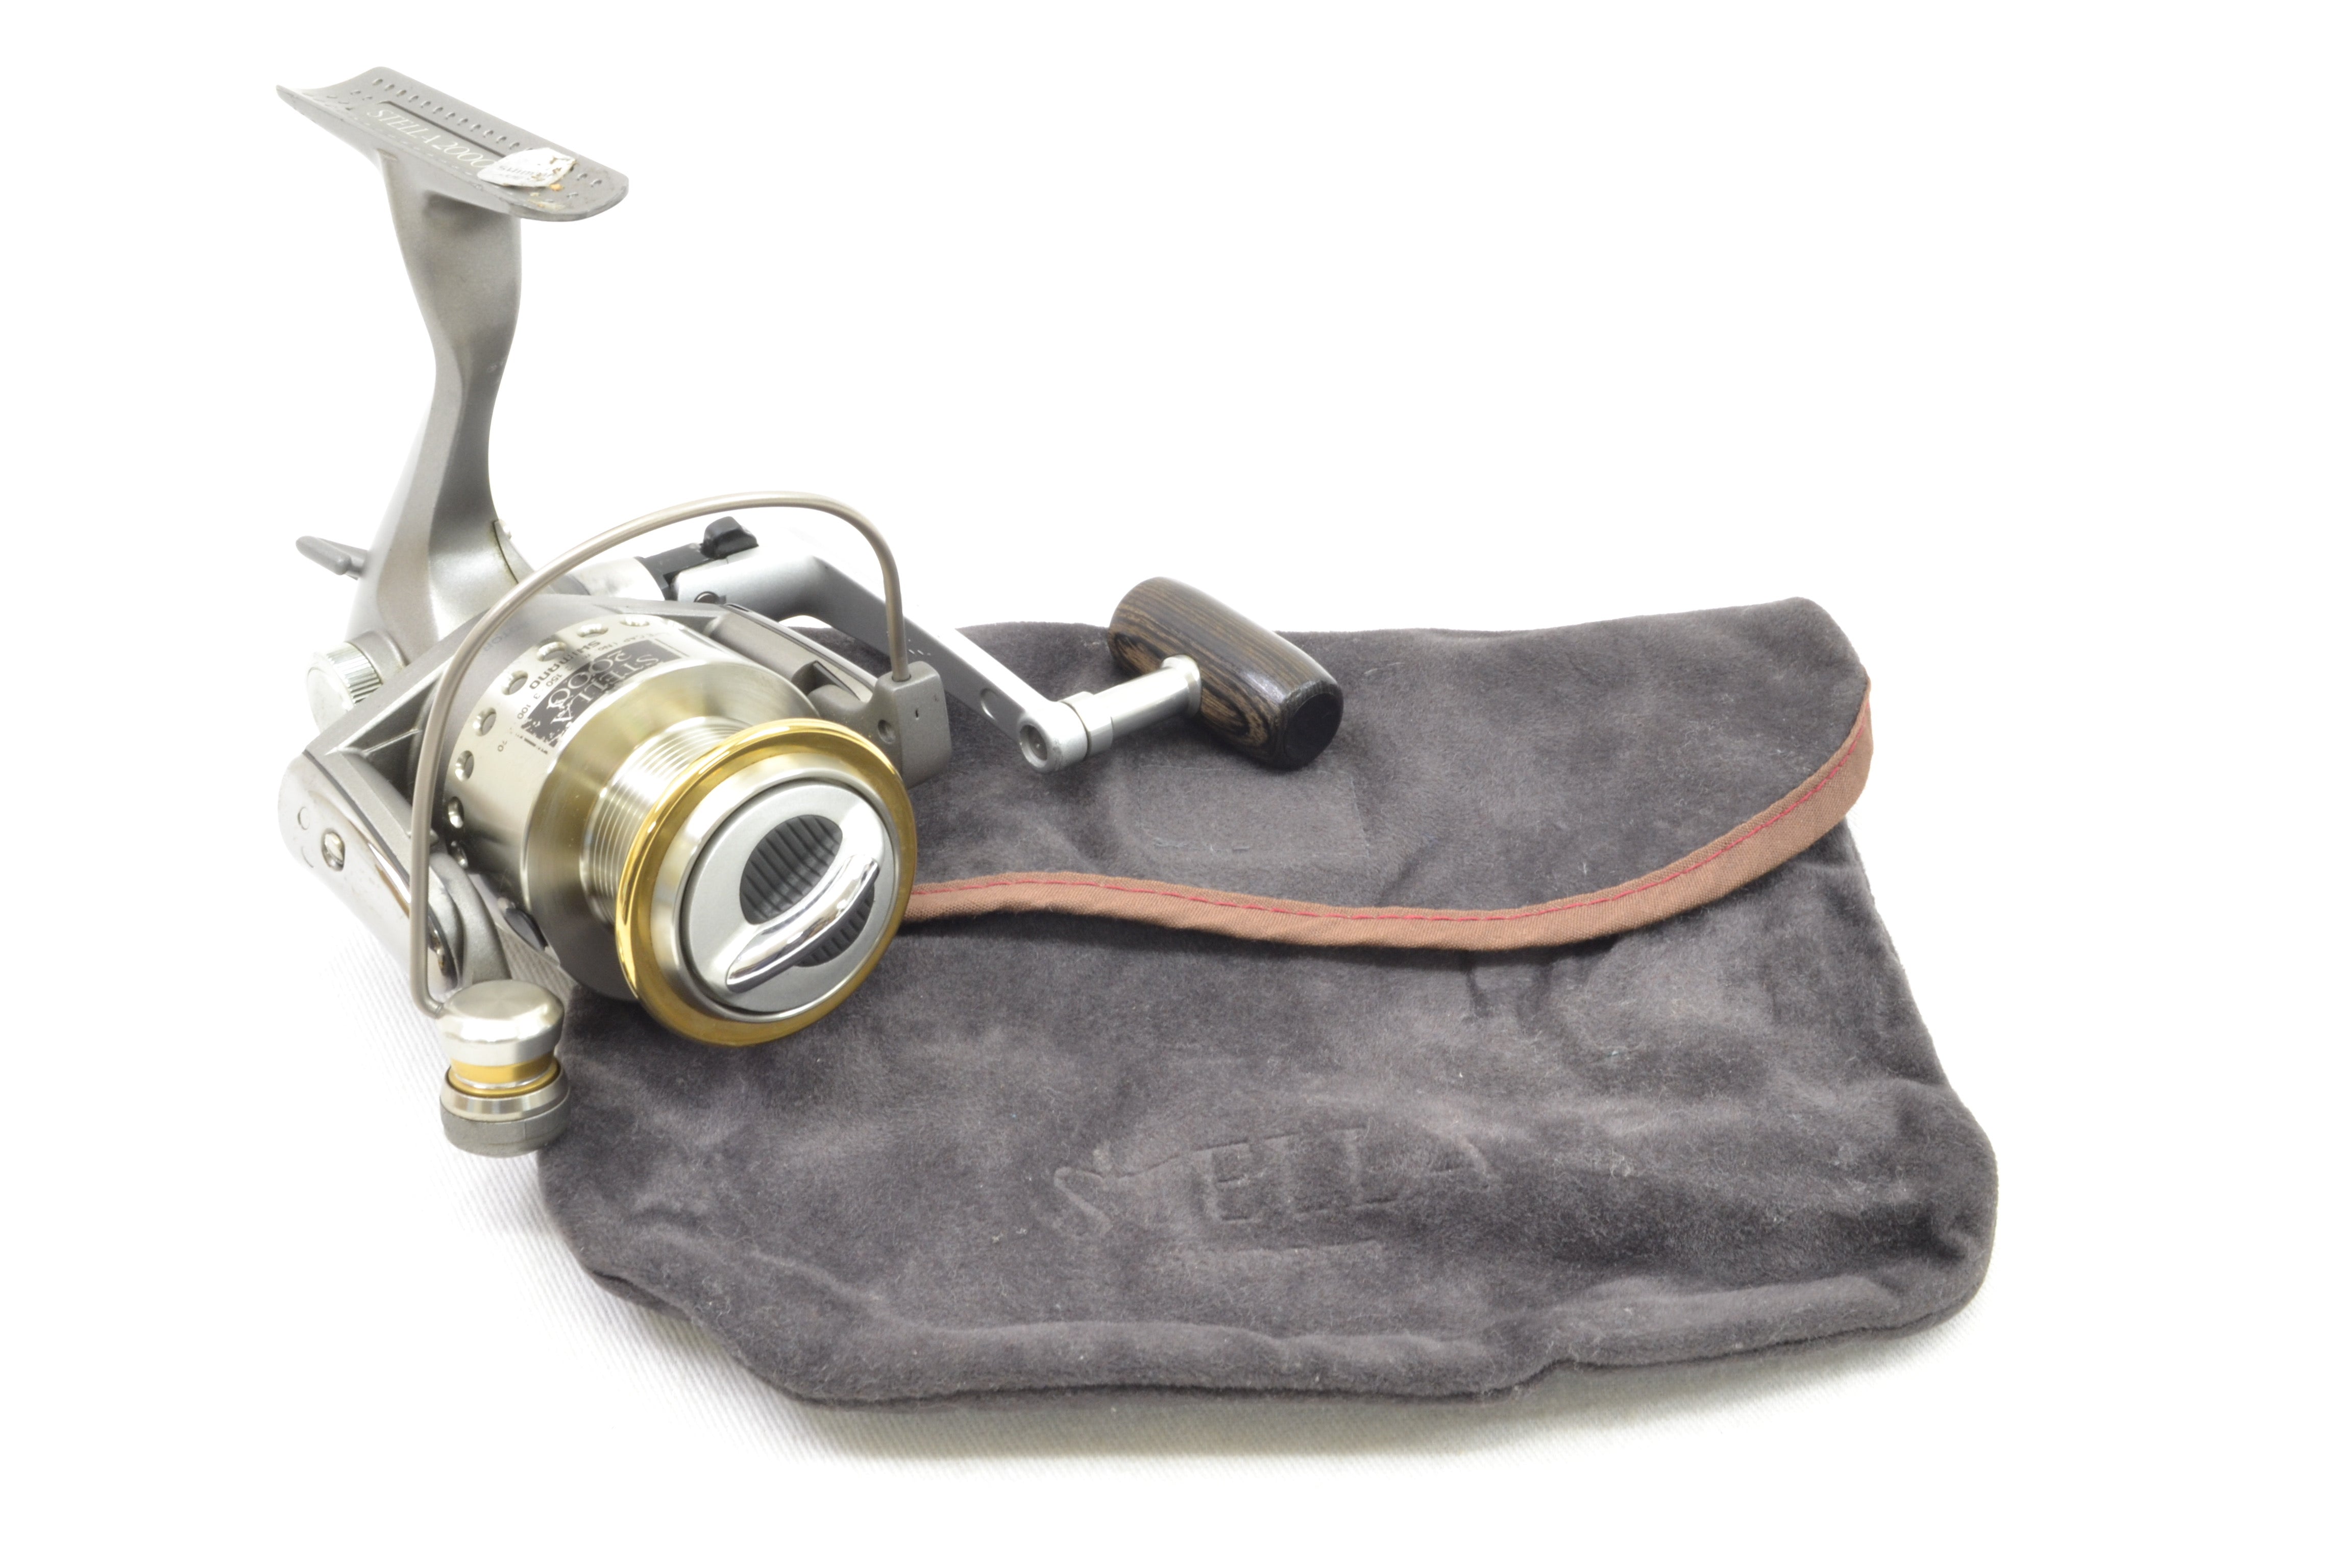 Shimano 95 STELLA 2000 DH Spinning Reel from Japan Used 1995 Black Bass